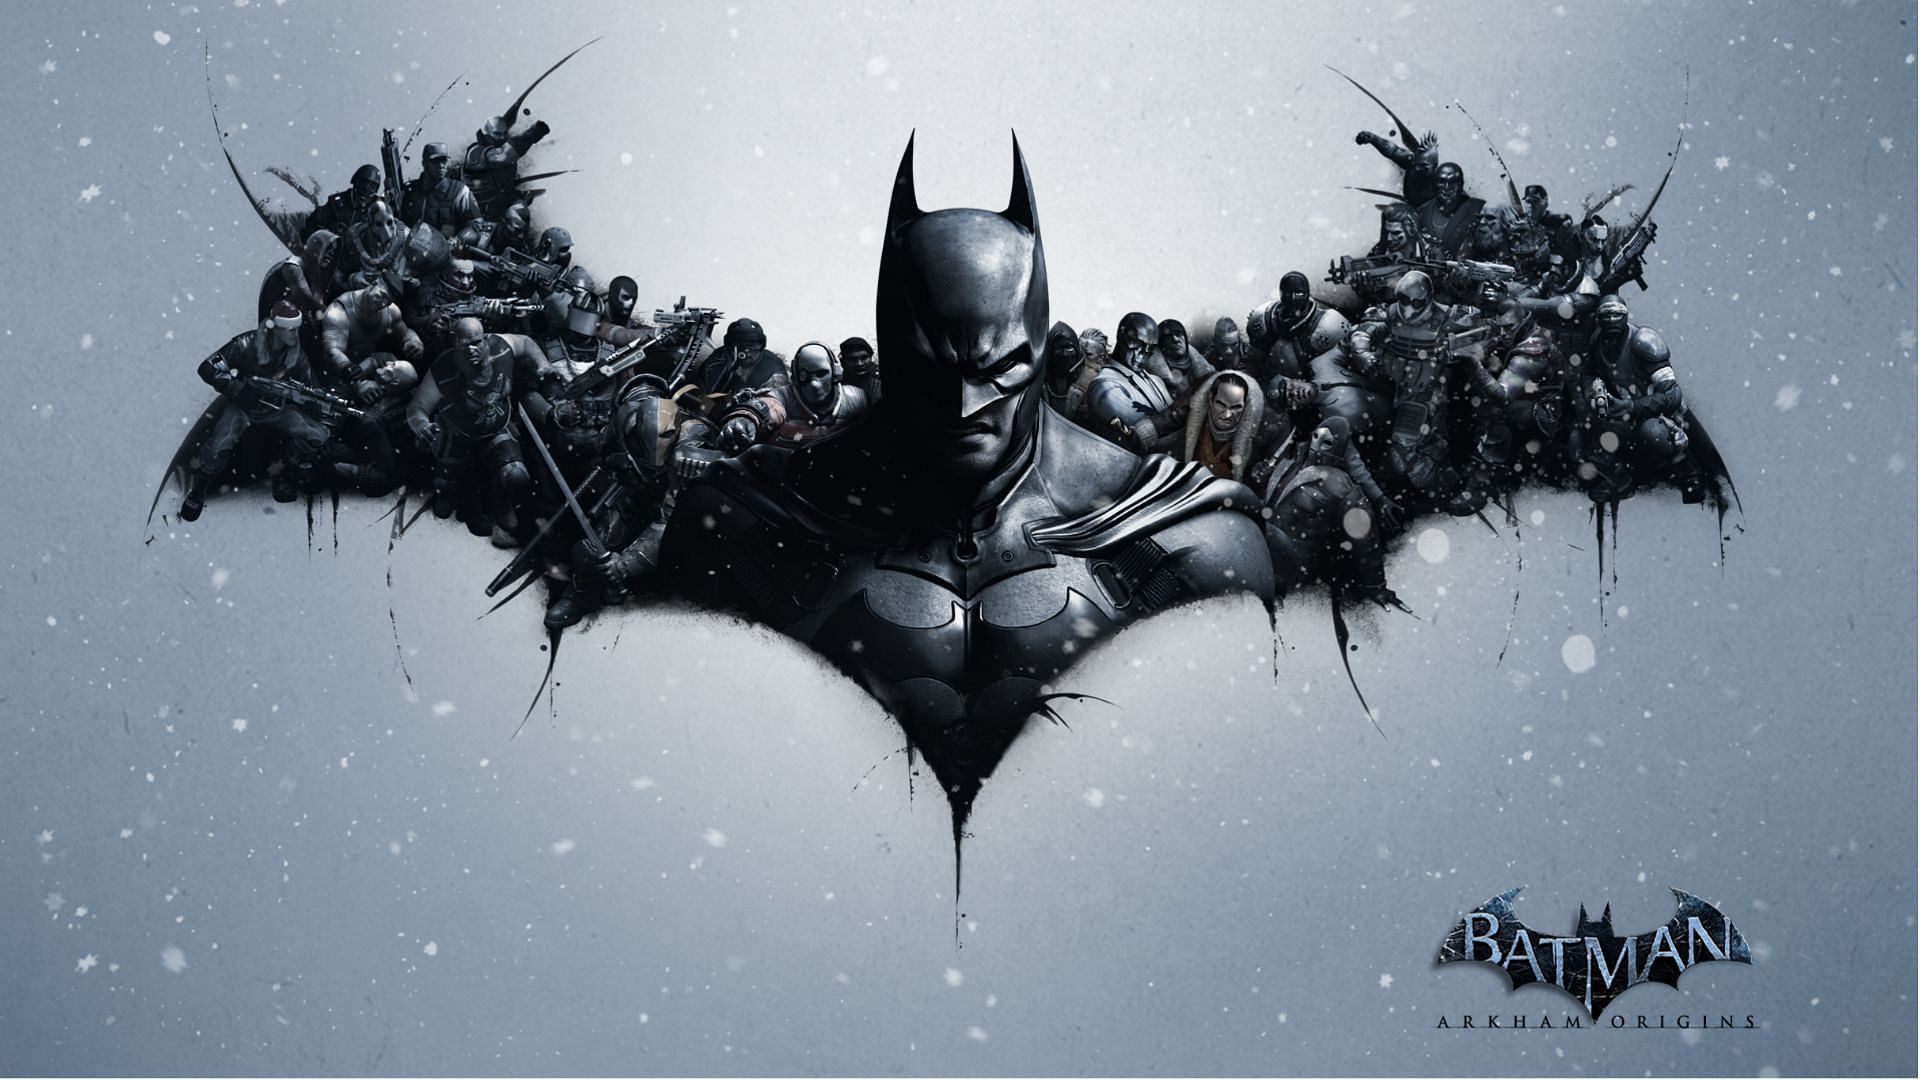 Batman: Arkham Origins introduced a more grounded take on the Arkham series (Image via WB Games Montreal)